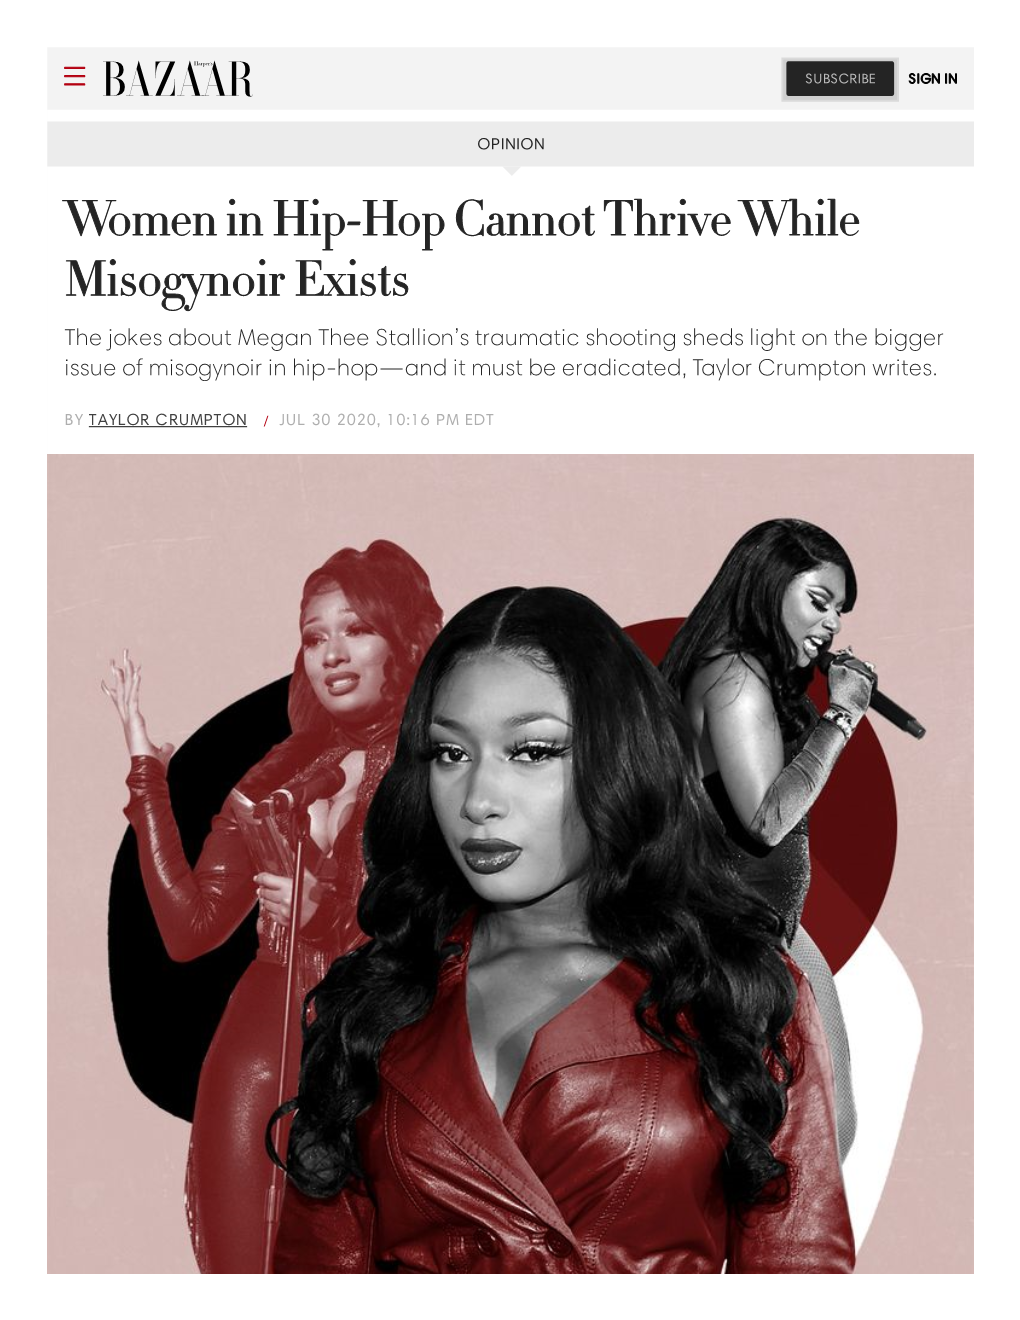 Women in Hip-Hop Cannot Thrive While Misogynoir Exists